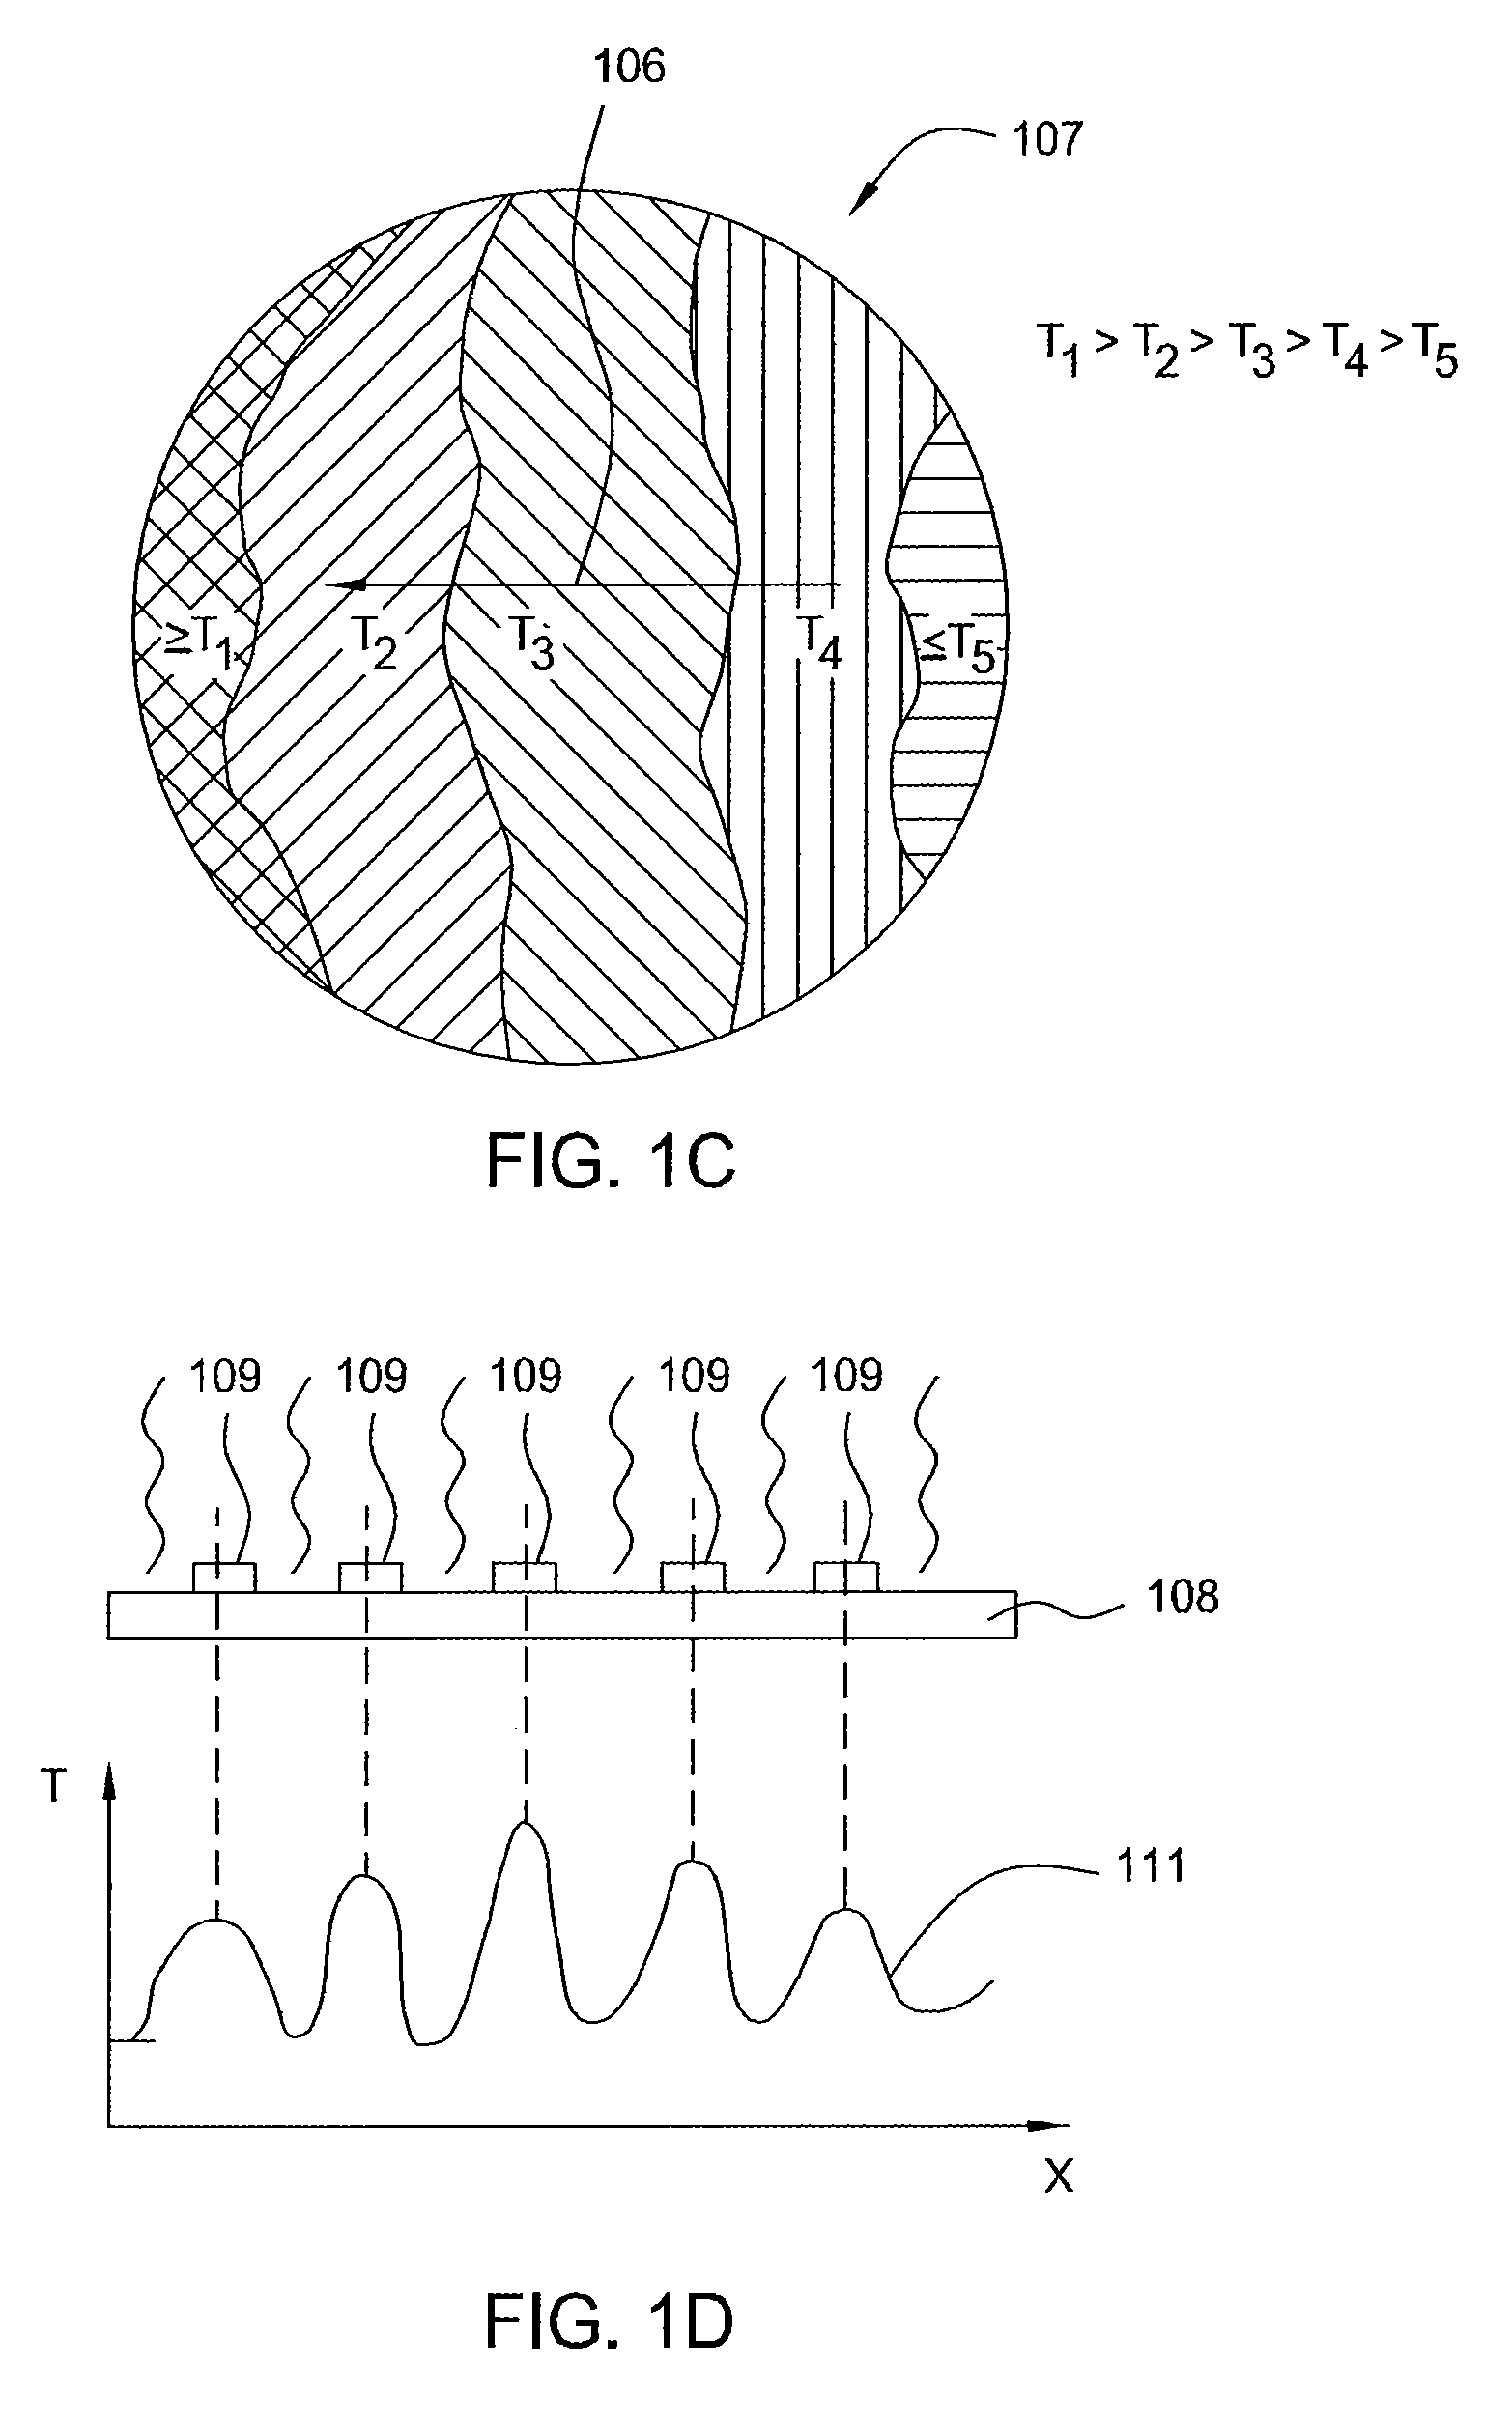 System for non radial temperature control for rotating substrates